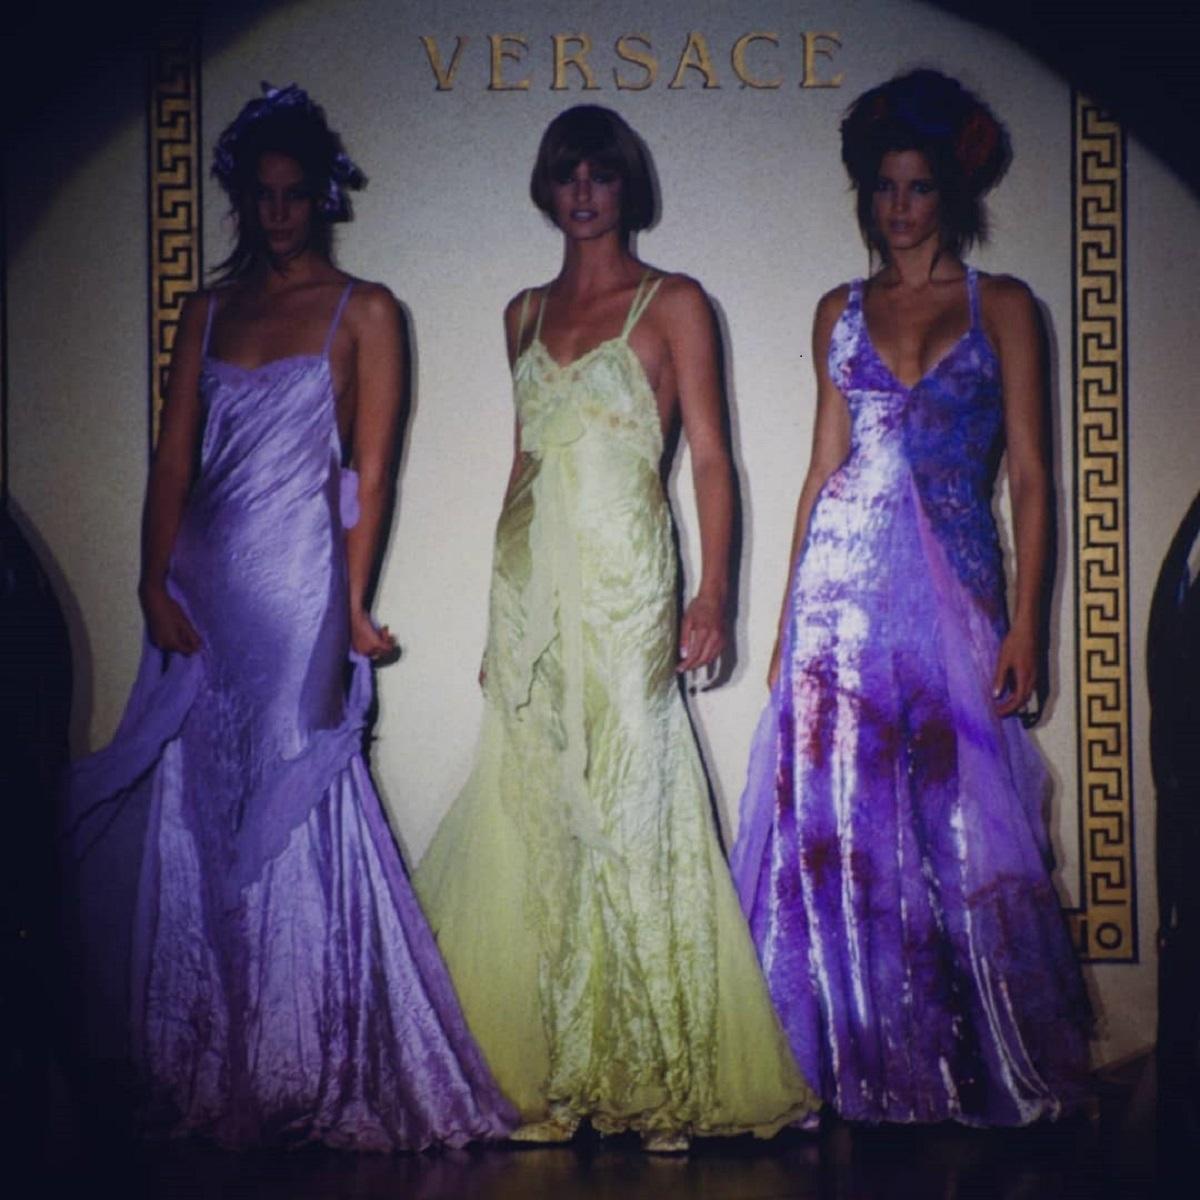 New Atelier Versace Velvet Lace Watercolor Purple/Pink Dress Gown
S/S 1994 Collection
Purple and Pink Watercolor Crushed Velvet and Lace, Corset Style, Fully Lined, Side Zip Closure.
Measurements: Length - 60 inches, Bust - 32